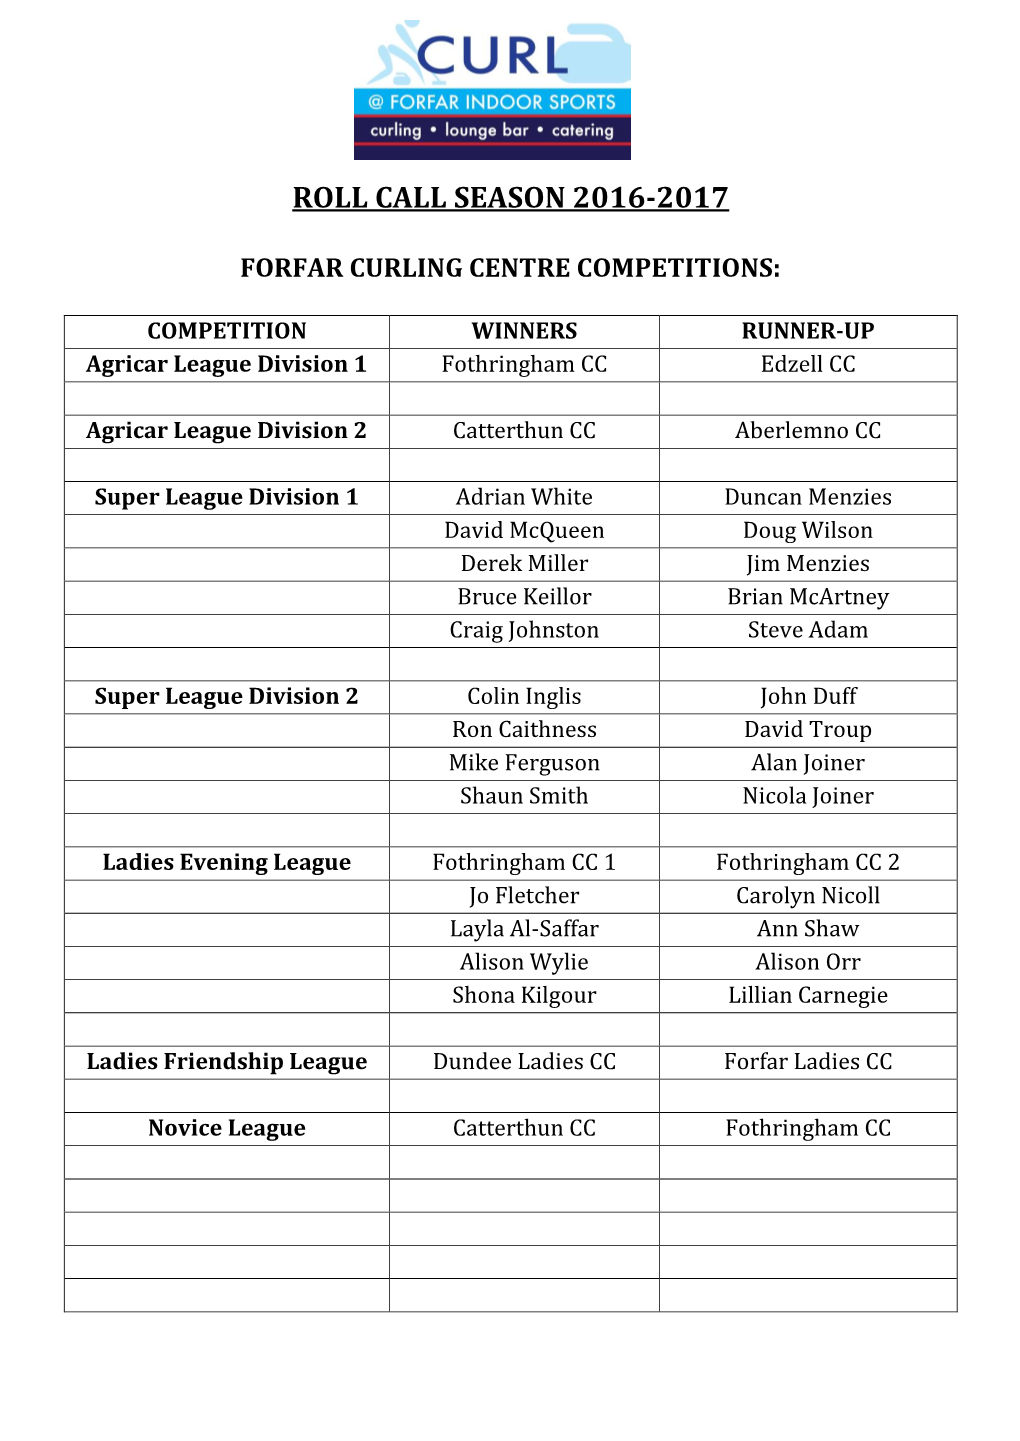 Roll Call Season 2016-2017 Forfar Curling Centre Competitions